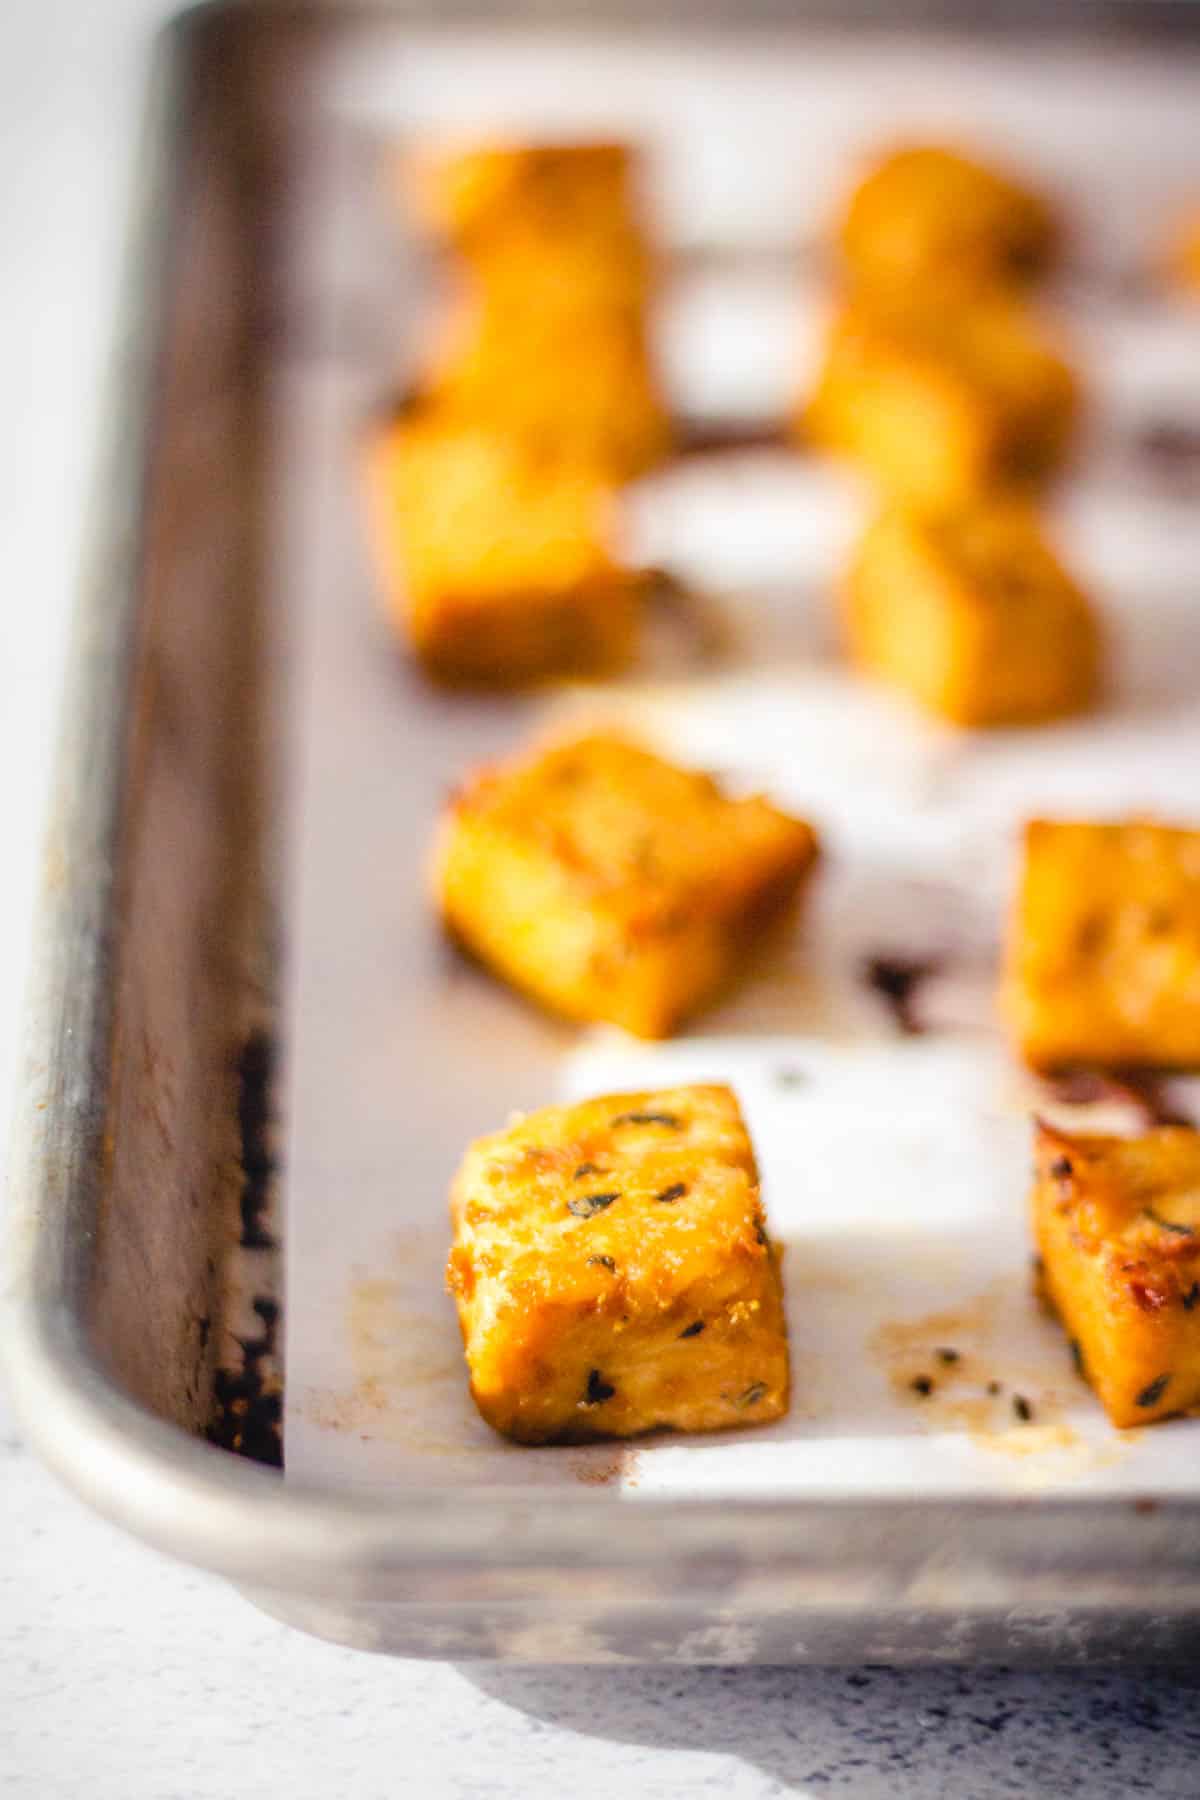 Marinated baked tempeh cubes on a baking sheet.